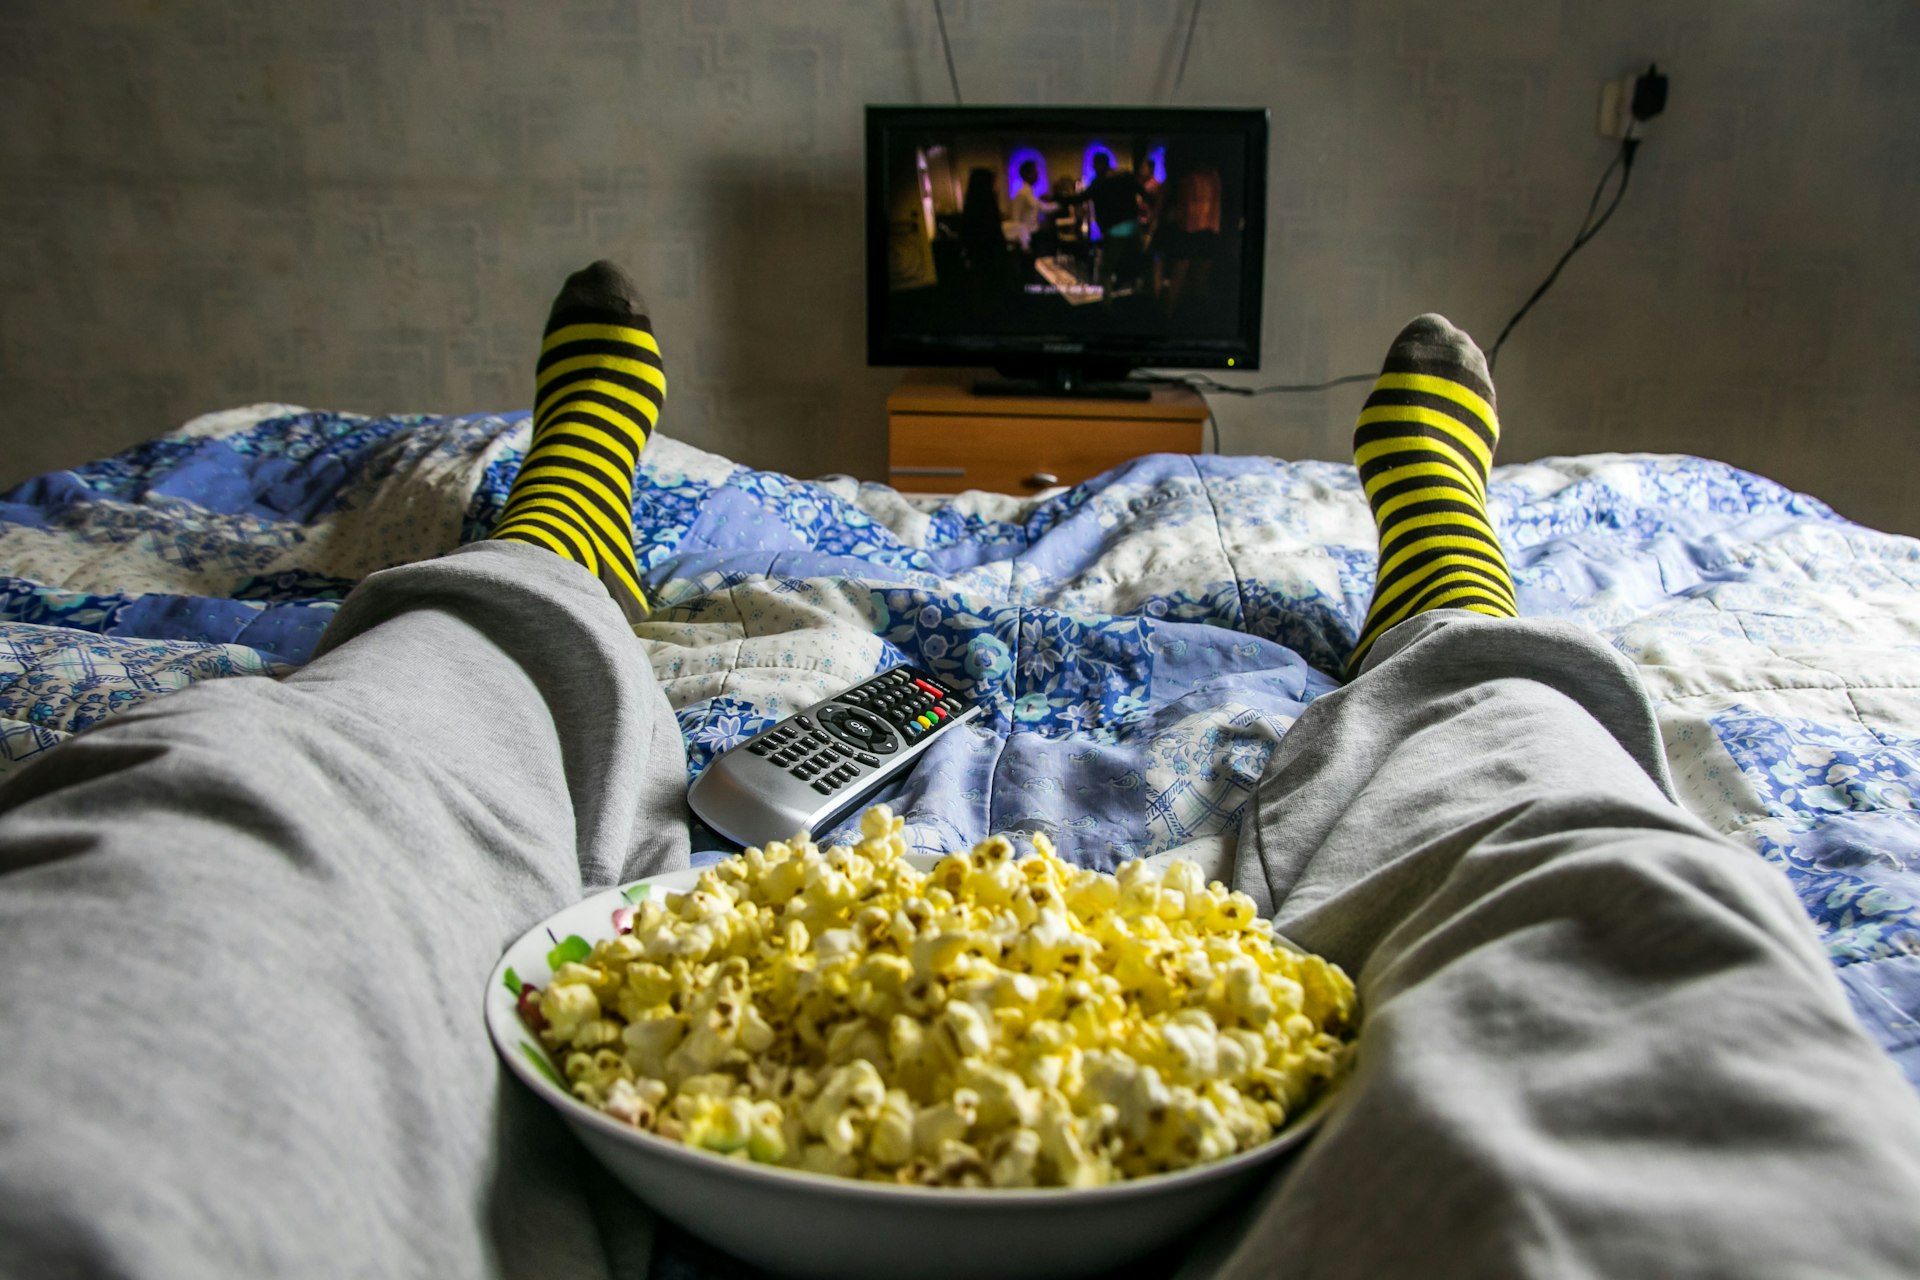 Legs of a person laying on a bed, wearing gray pants and stripe socks has a bowl of popcorn between their legs and a remote control by their foot. There is a TV on a wooden stand.